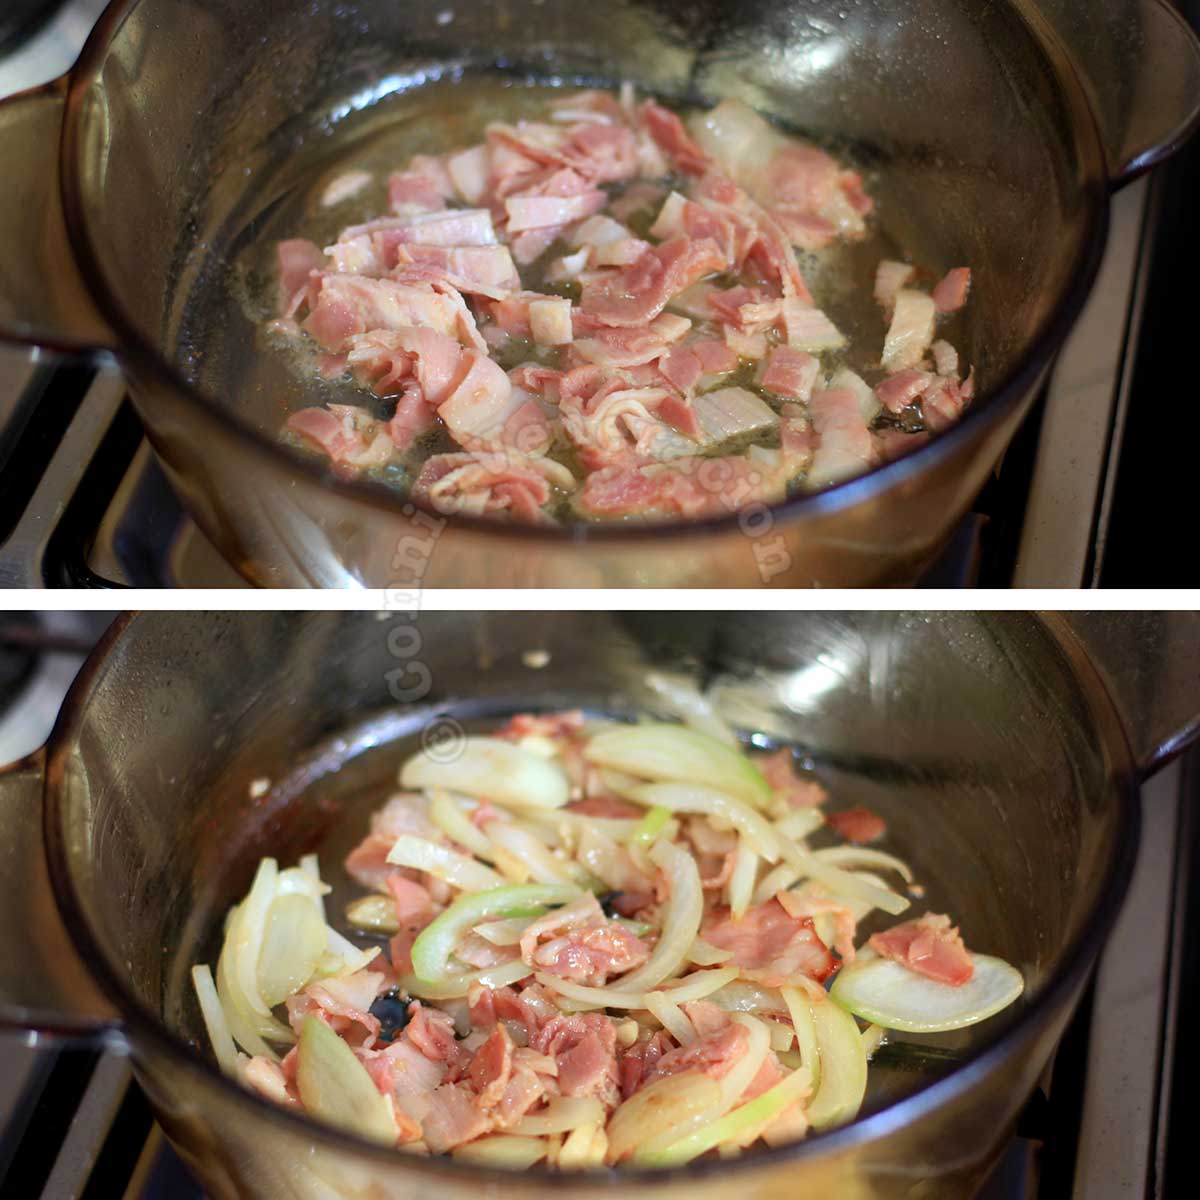 Browning bacon and cooking onion in rendered bacon fat